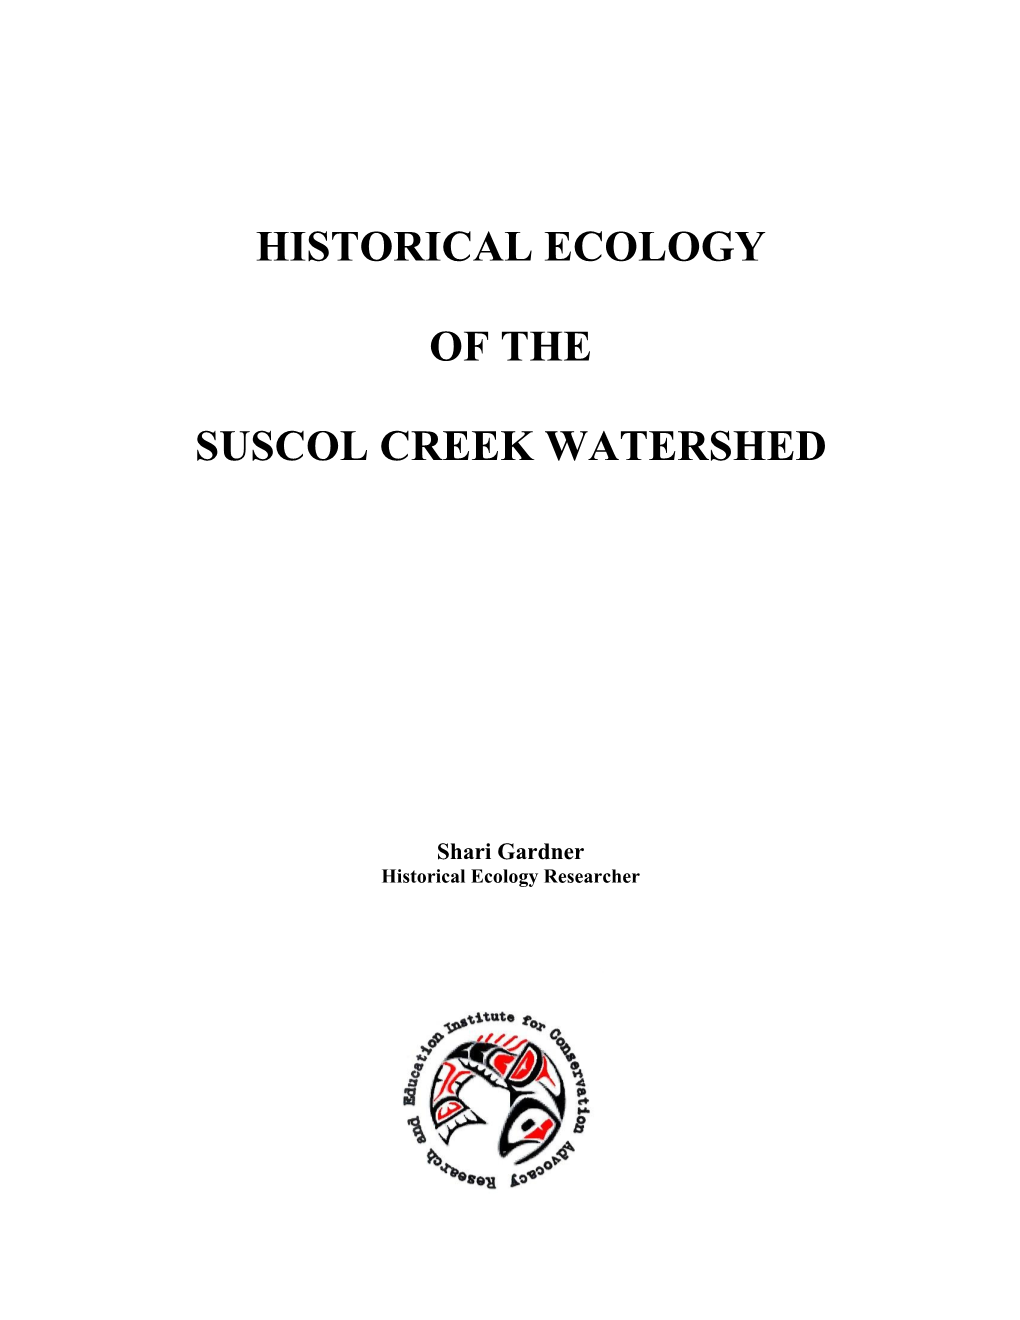 HISTORICAL ECOLOGY of the SUSCOL CREEK WATERSHED Preliminary DRAFT REPORT